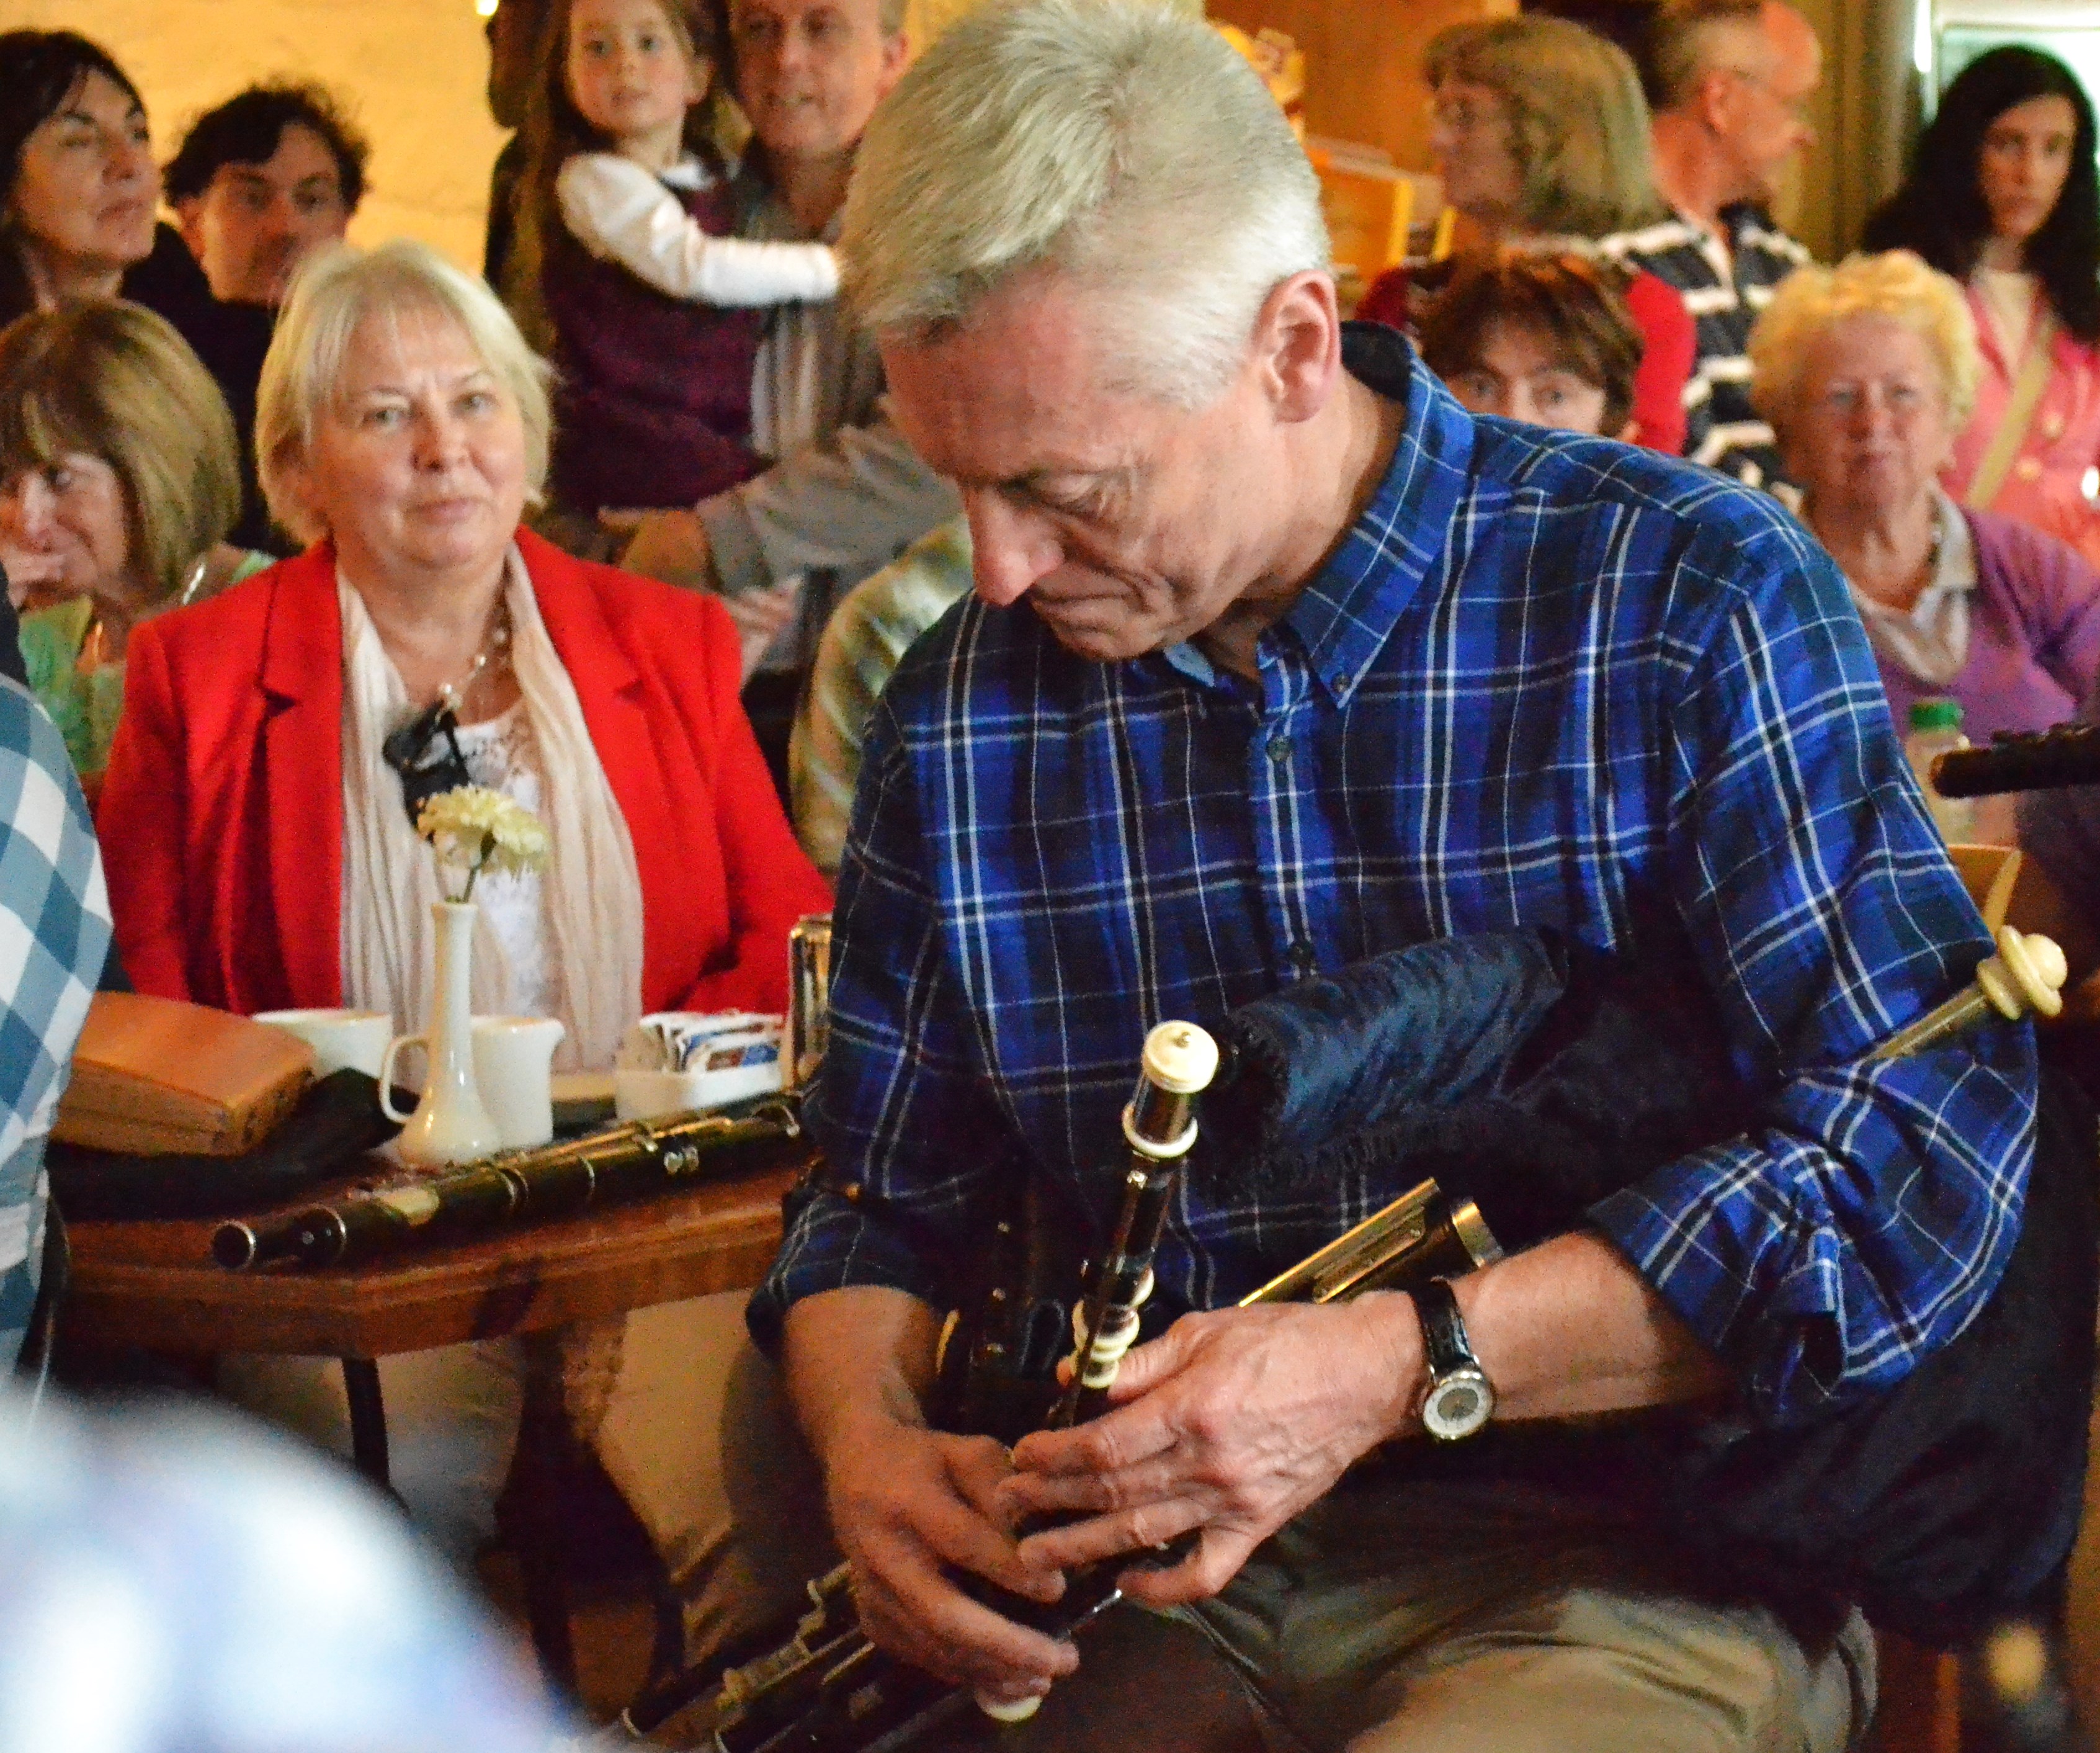 Mick O'Brien performing a solo at The Mills Sunday 18th May 2014 with Olivia Rowsome Grimes in the background.